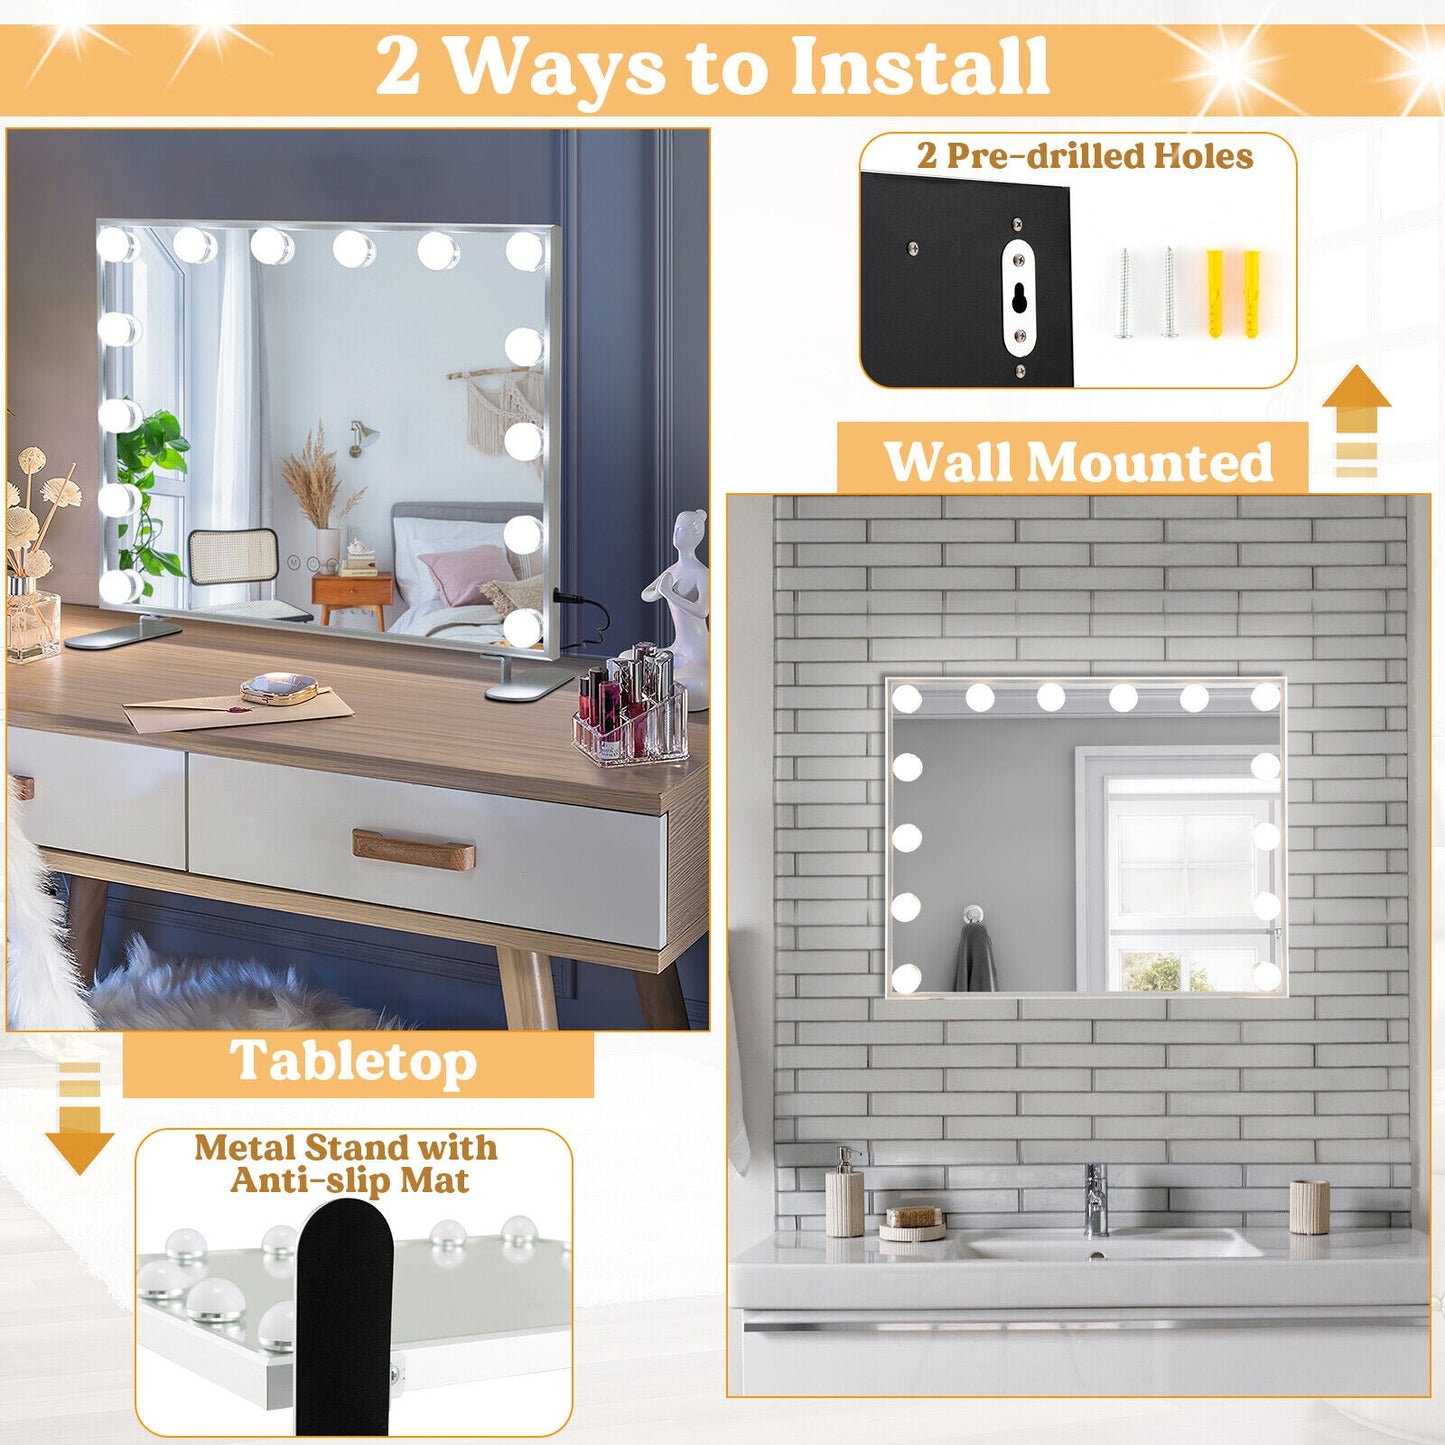 2-in-1 Vanity Mirror with 14 Dimmable LED Bulbs, Silver at Gallery Canada